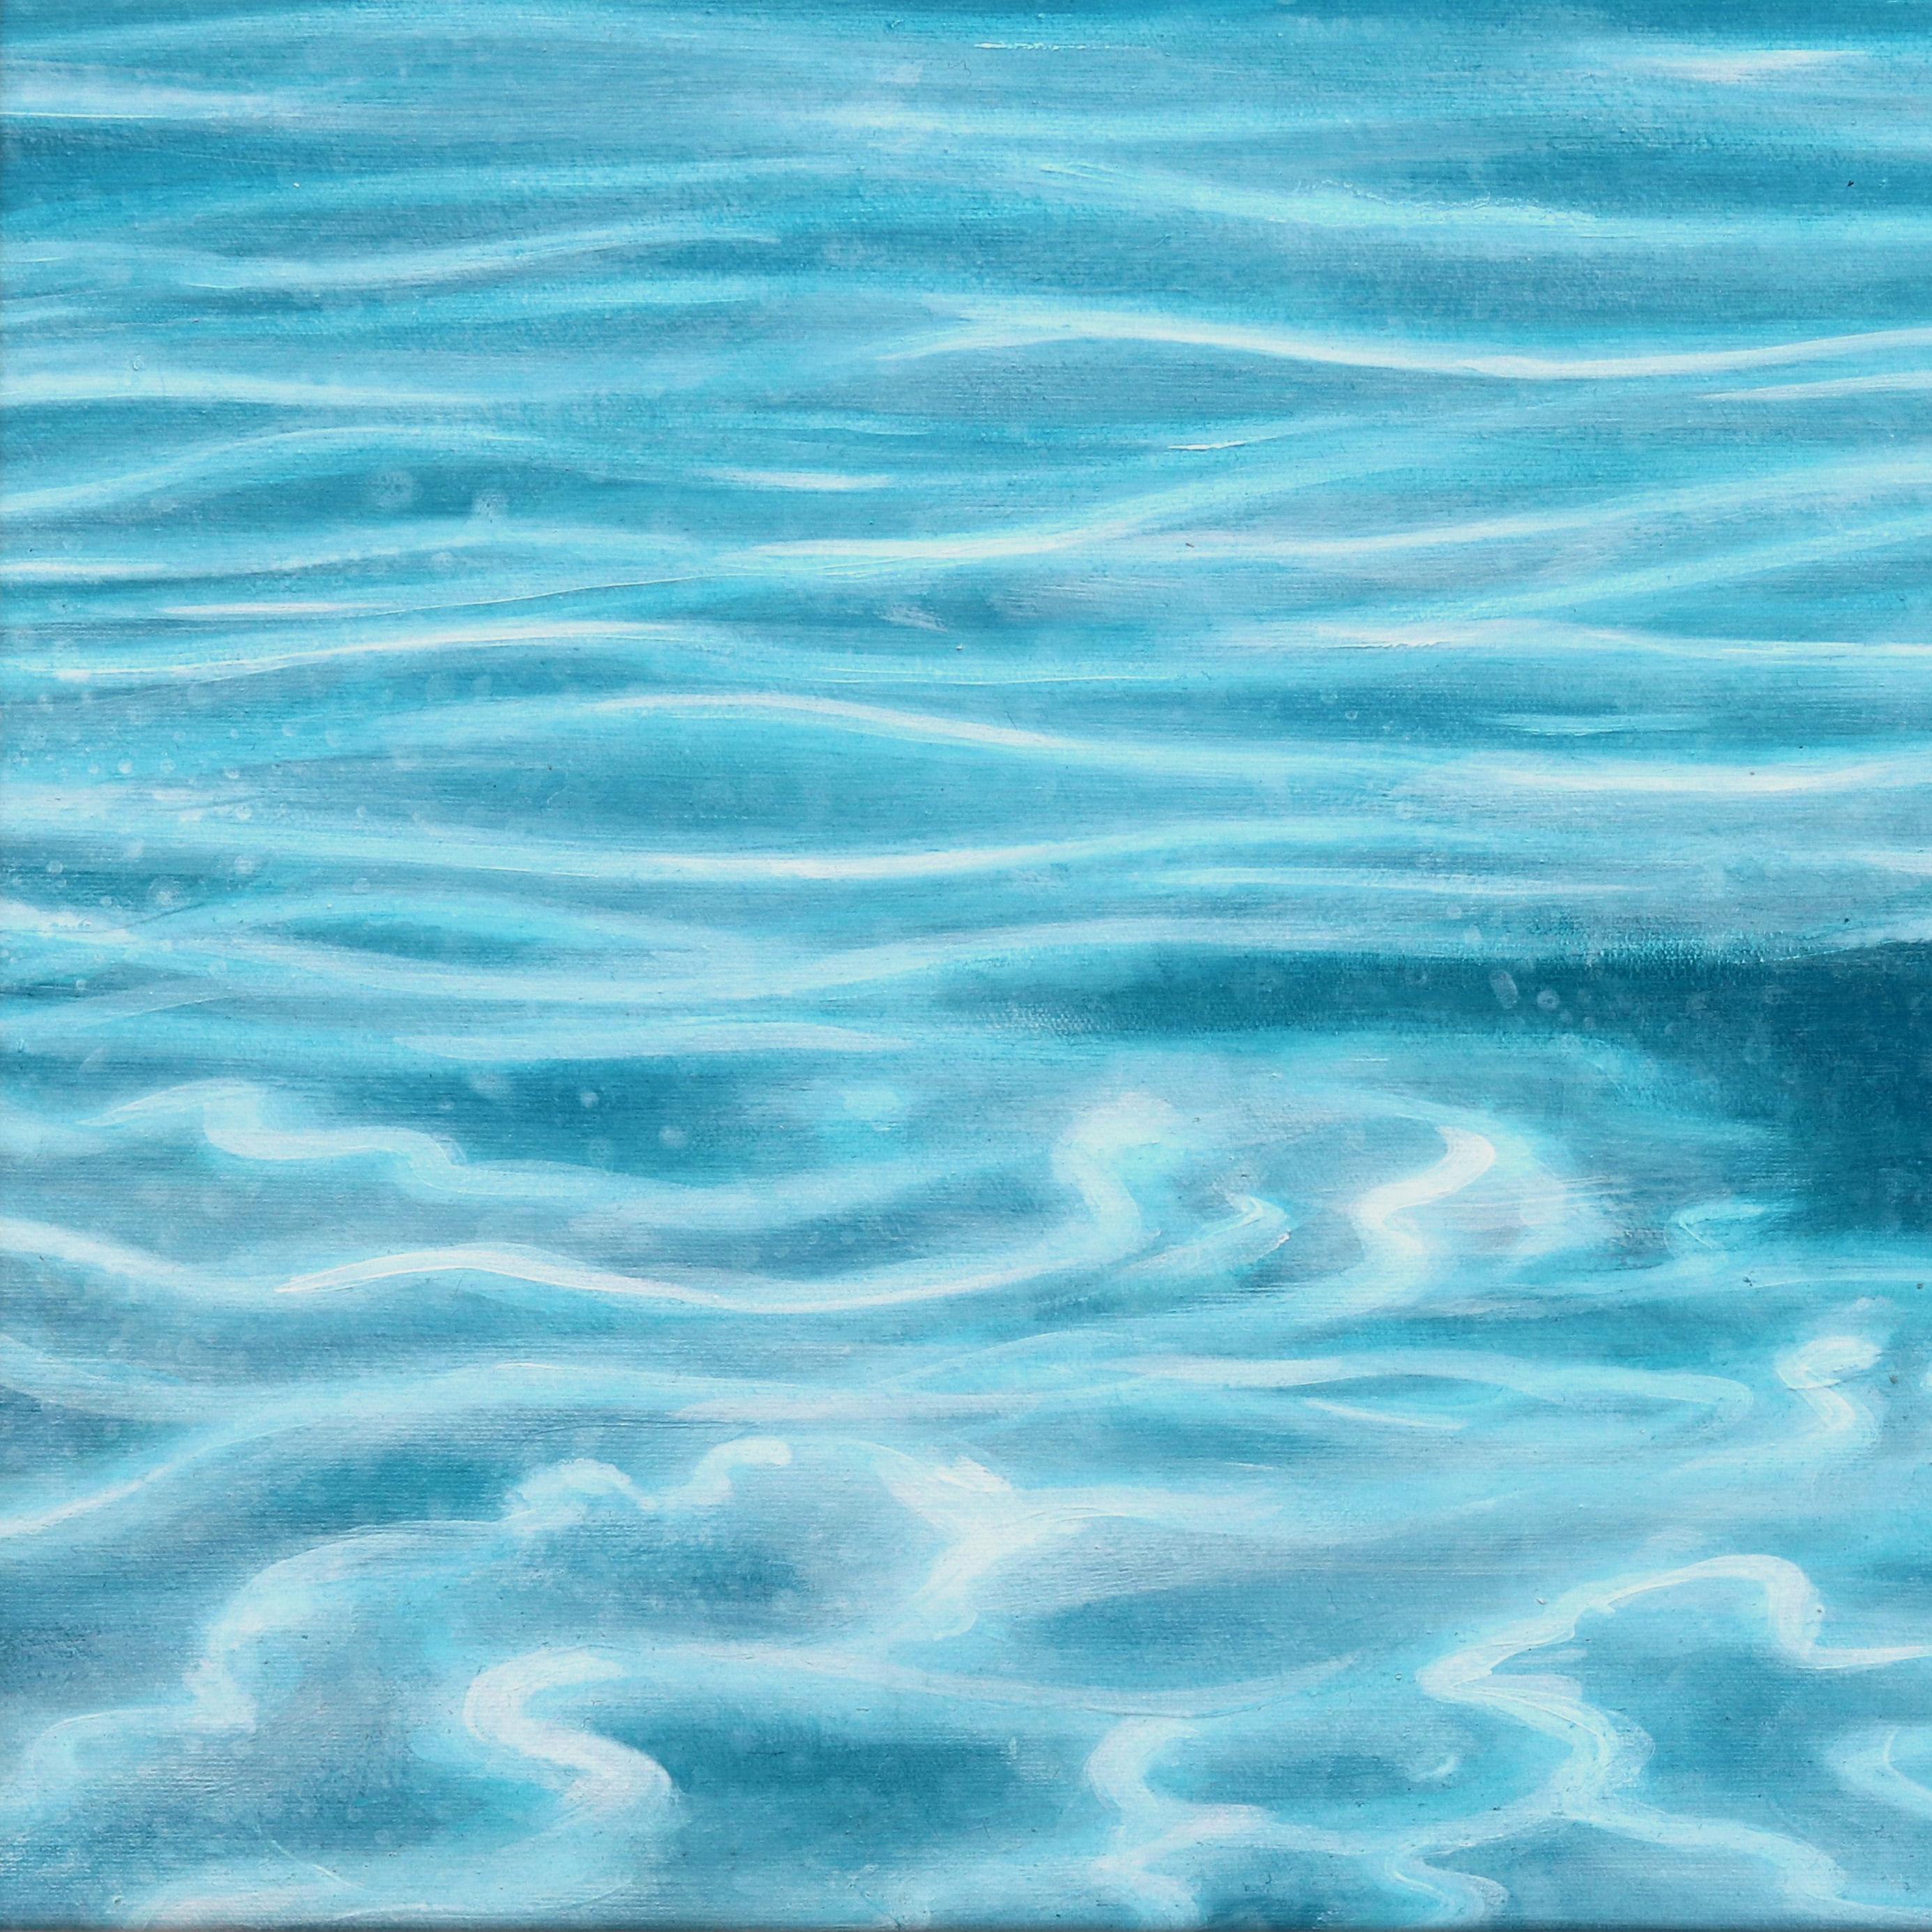 Summer Swim - Blue Figurative Painting by Elise Remender